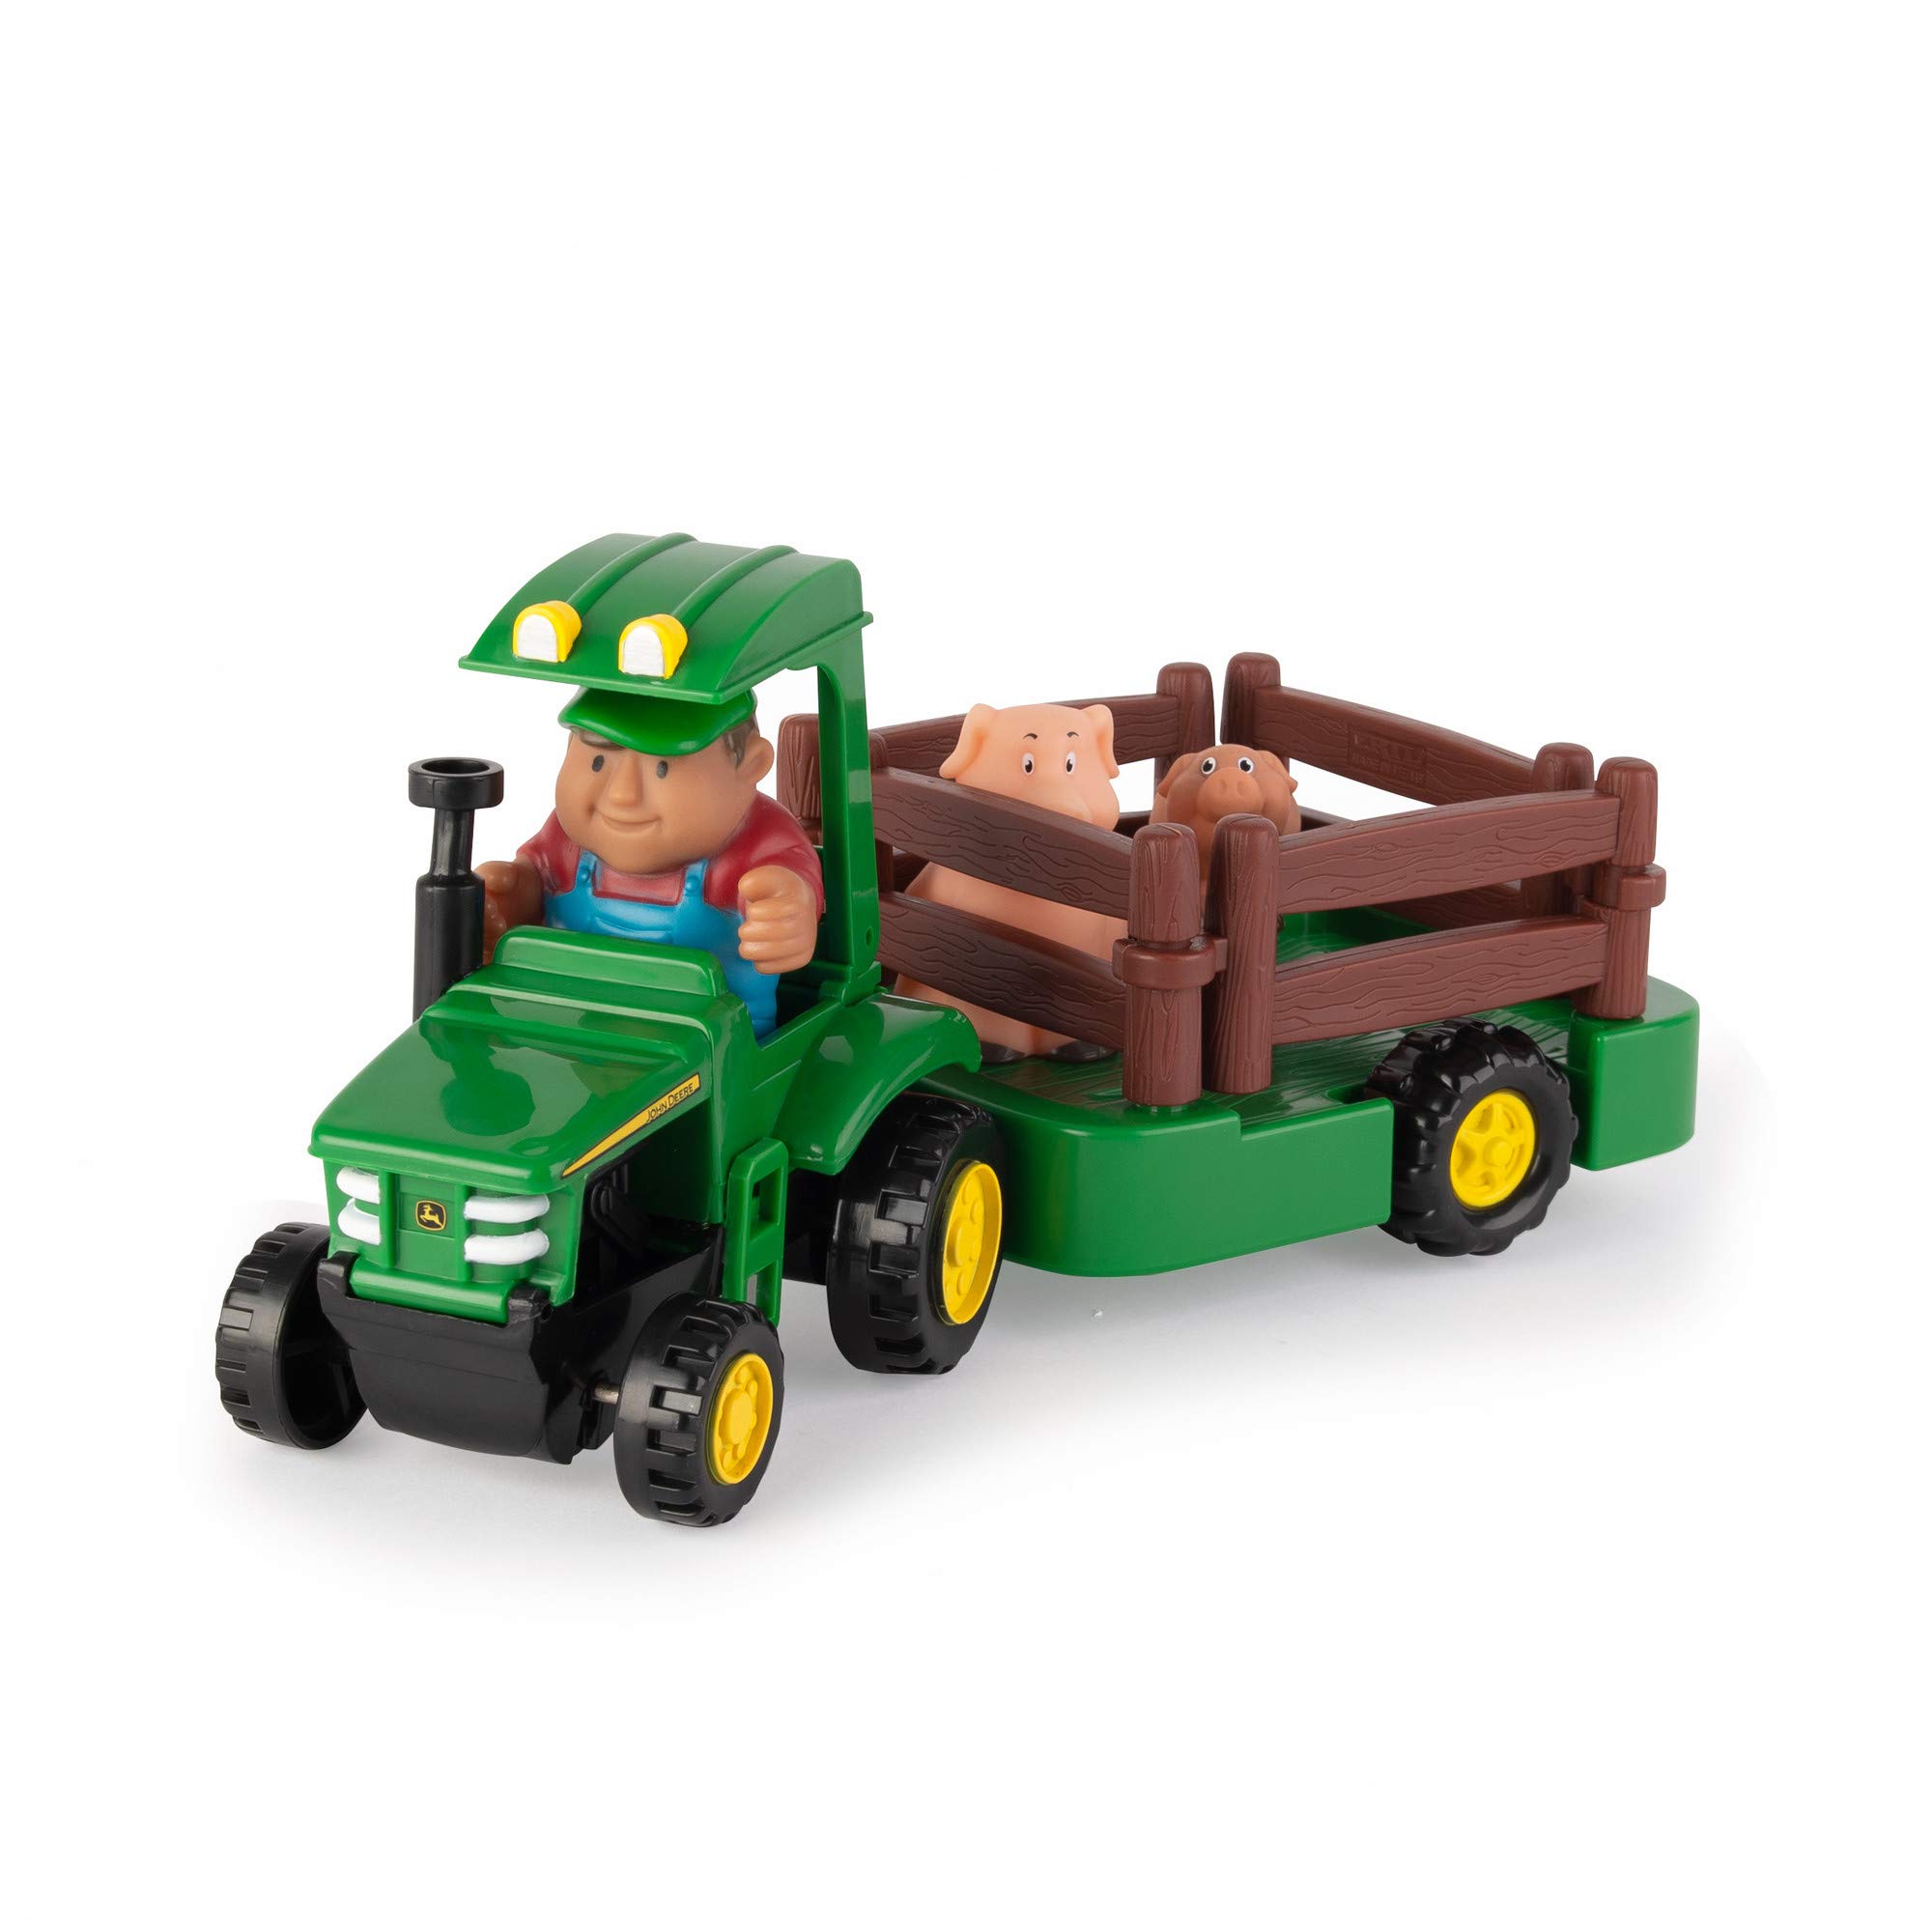 TOMY John Deere 1st Farming Fun Hauling Play Set with Tractor, Trailer, Farmer and Animals